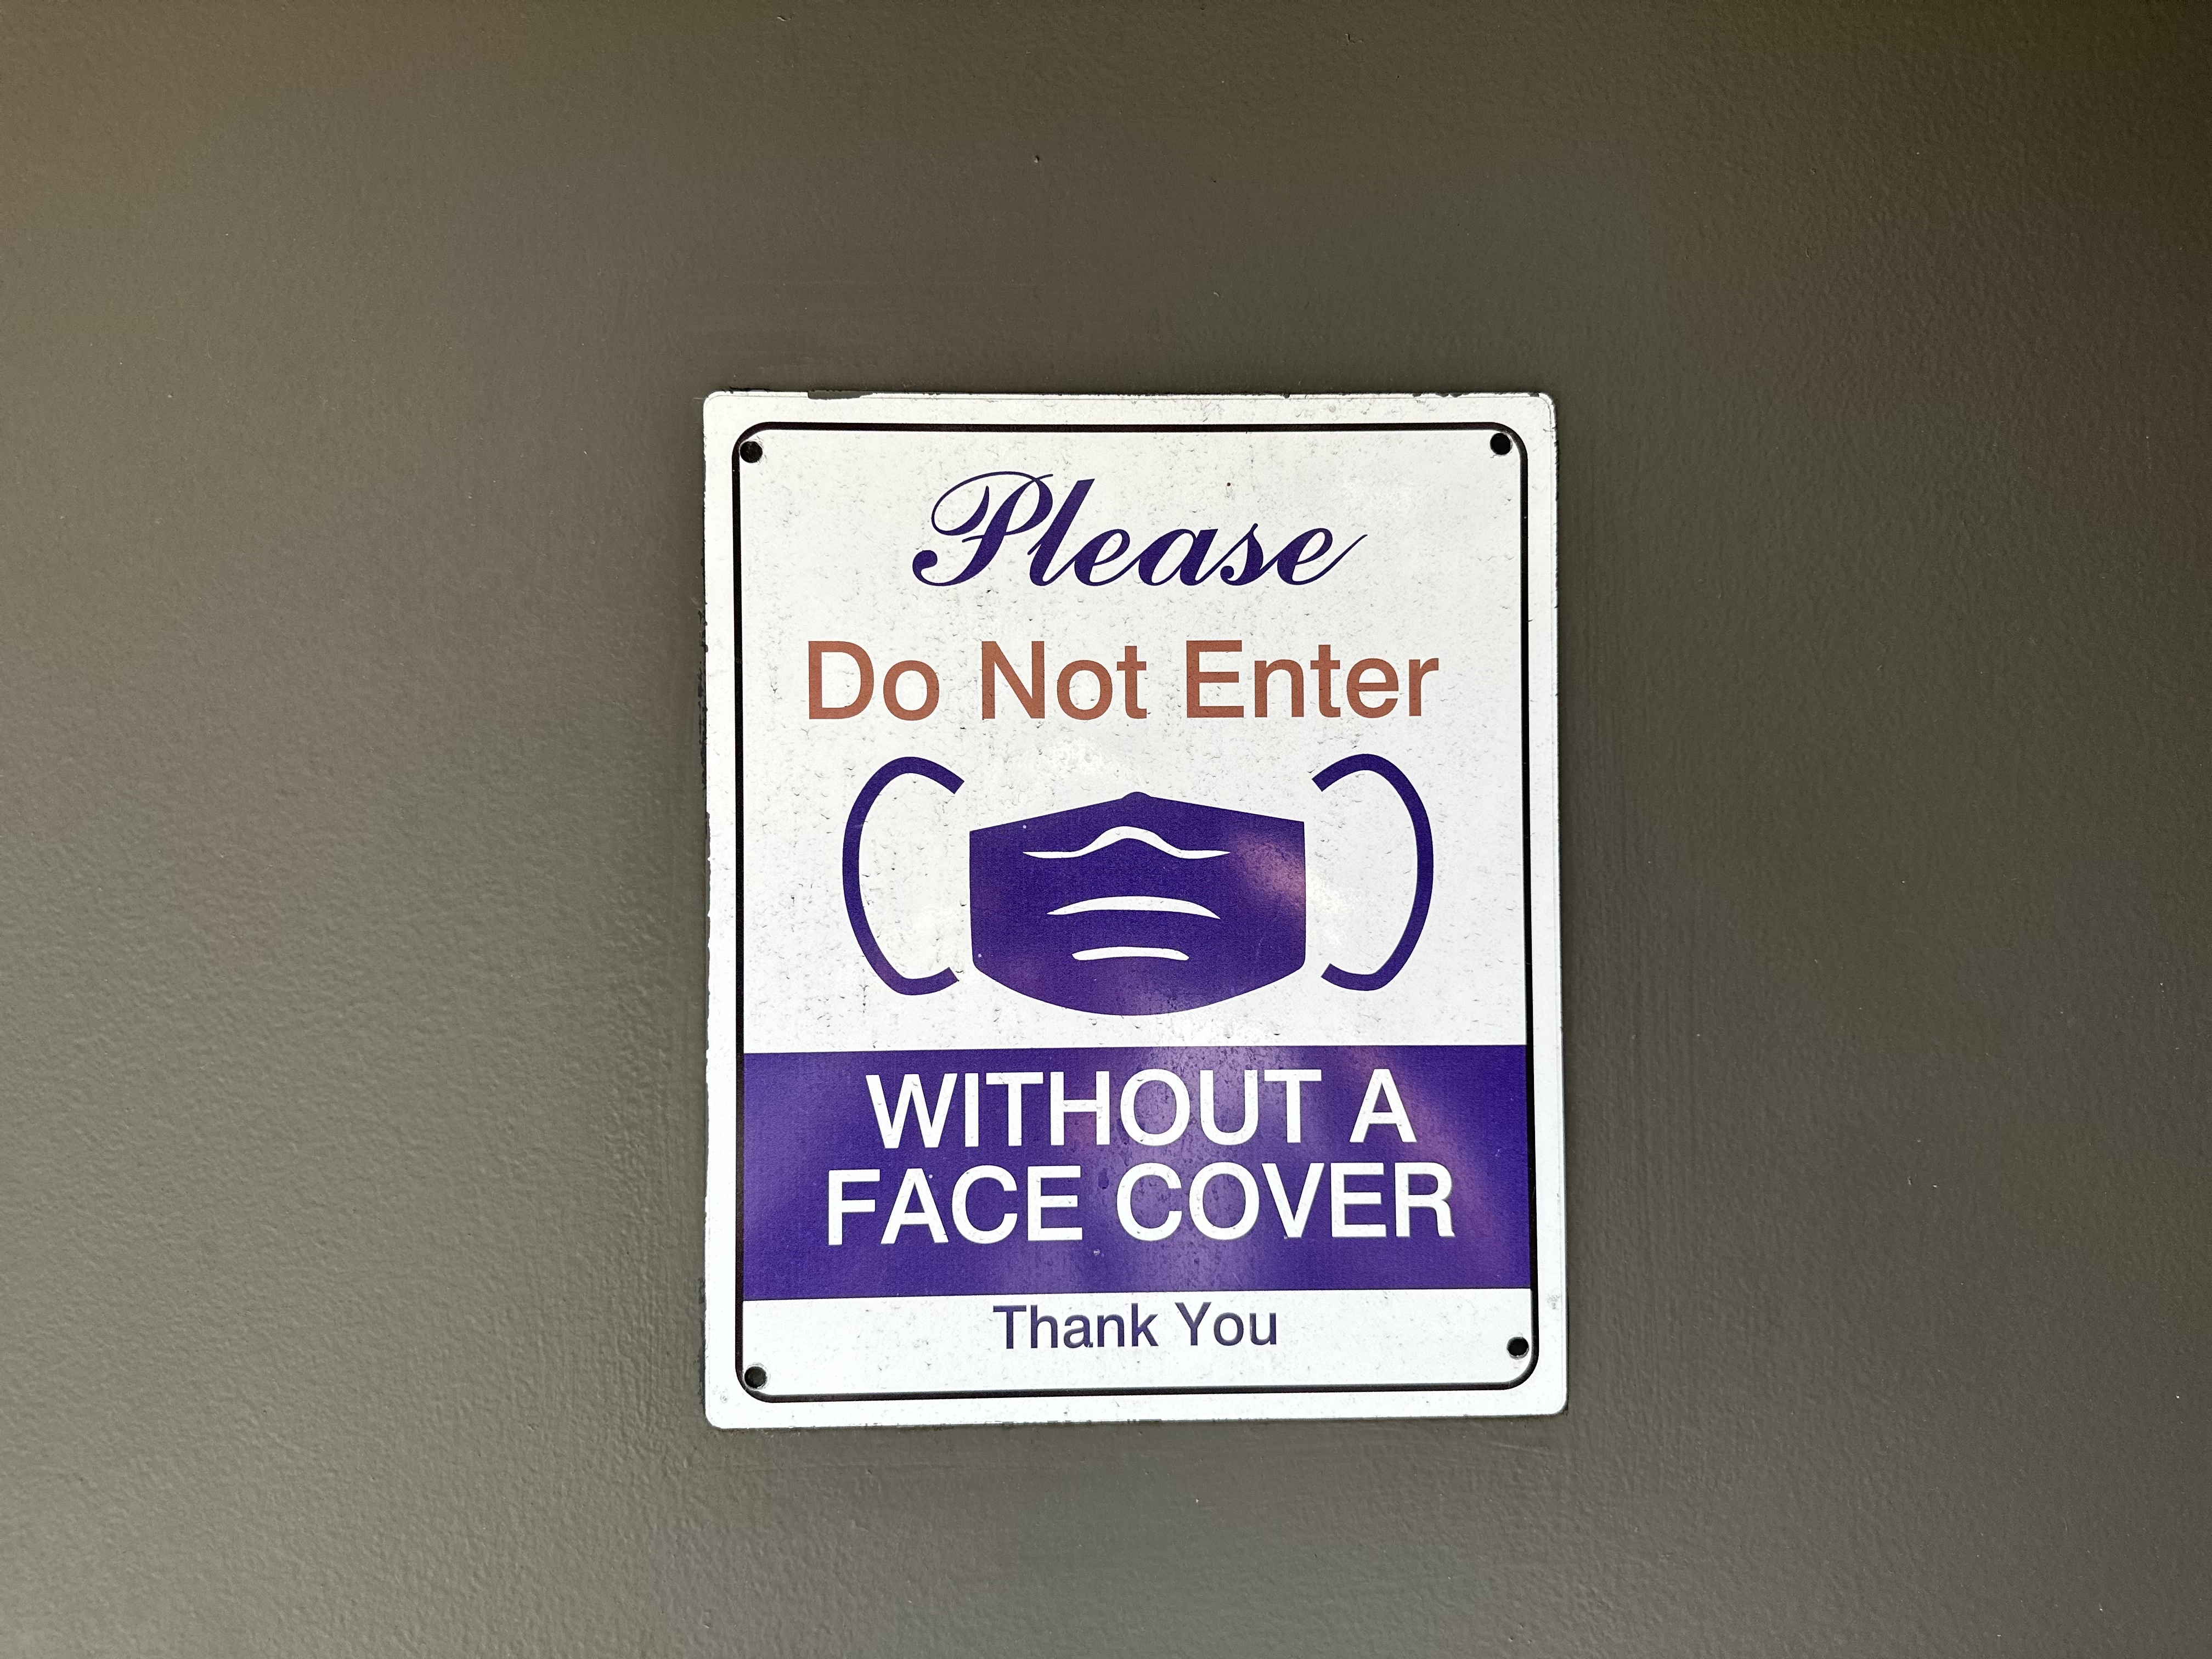 This face mask sign was still on E90th Street. 